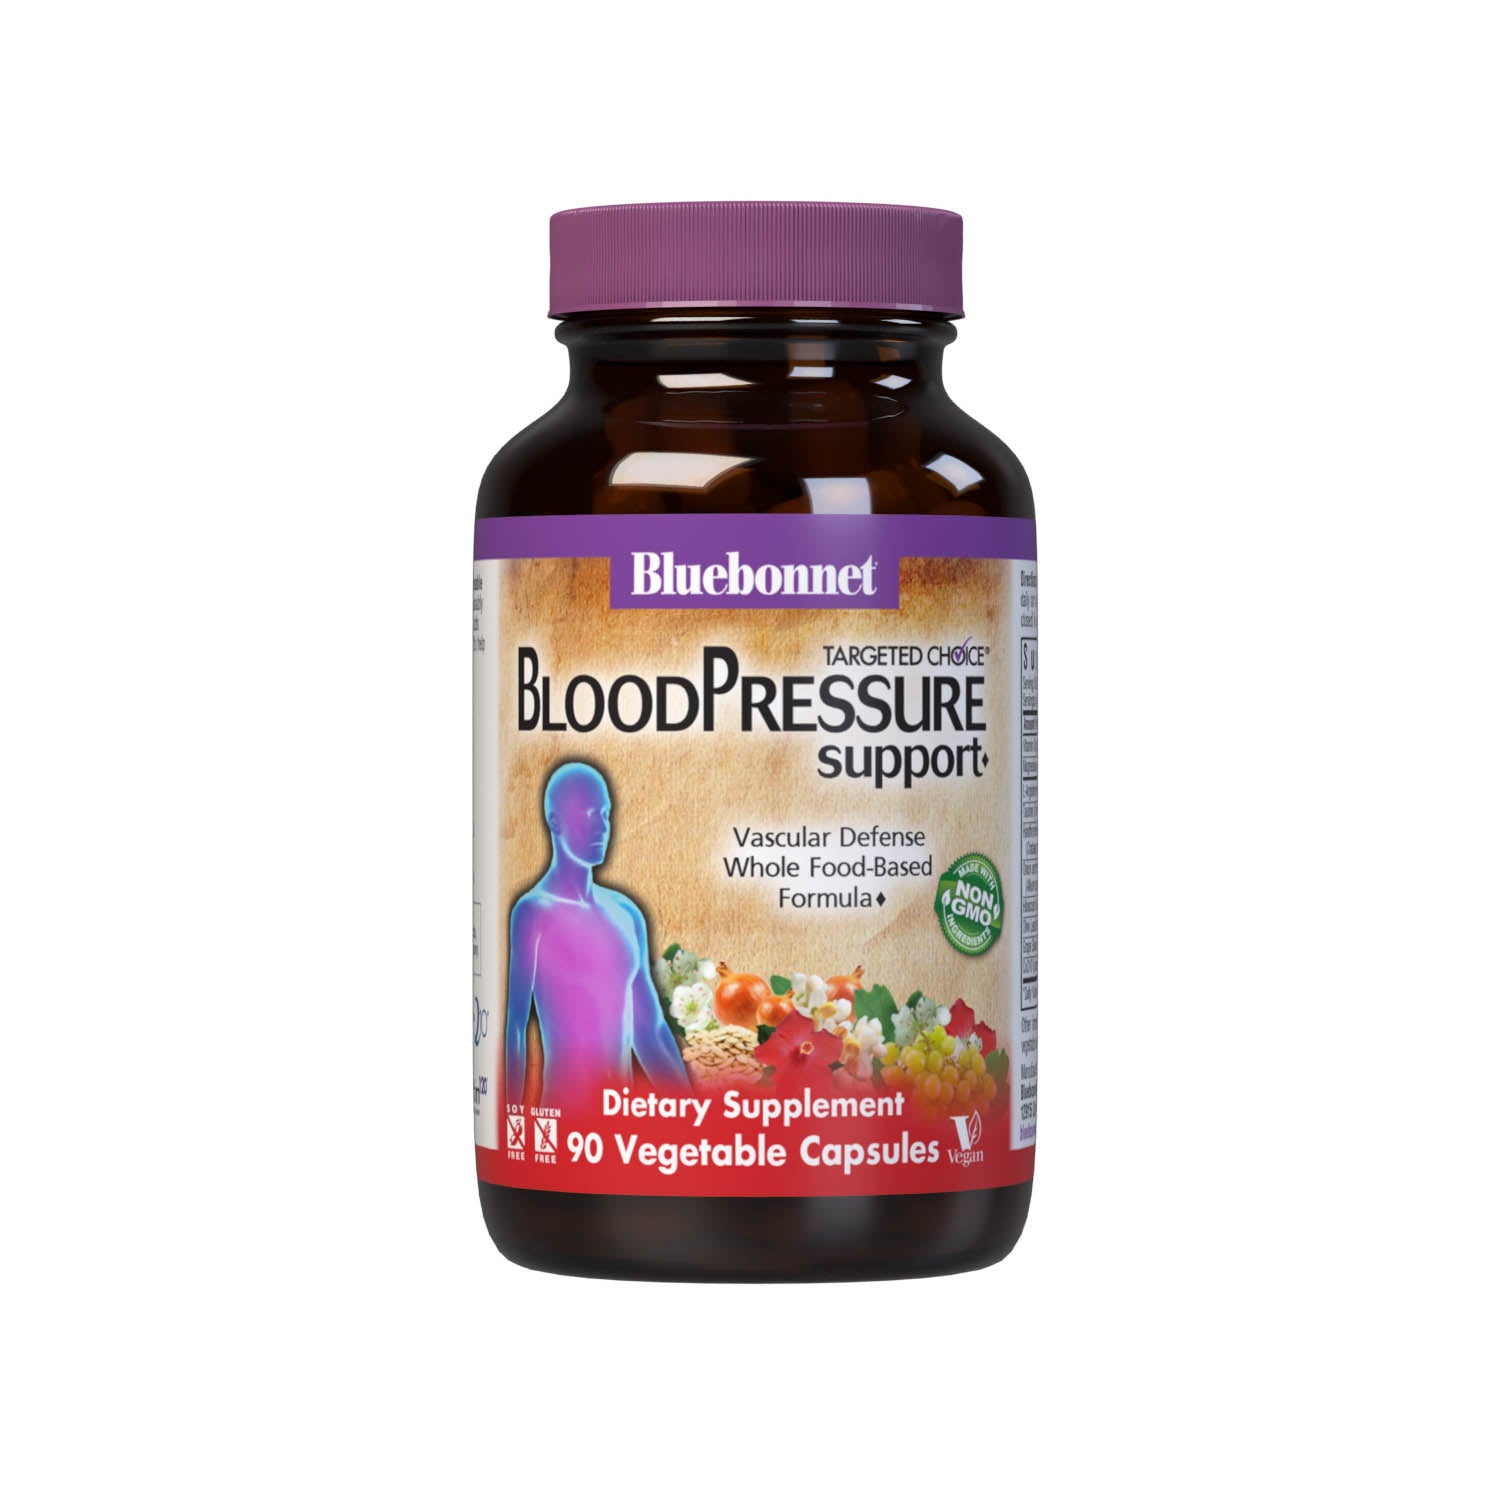 Bluebonnet’s Targeted Choice Blood Pressure Support 90 Vegetable Capsules are specially formulated with a unique blend of sustainably harvested or wildcrafted herbal/botanical extracts, the amino acids arginine and taurine, along with grape seed extract and CoQ10 to help support blood pressure levels that are already within the normal range. #size_90 count